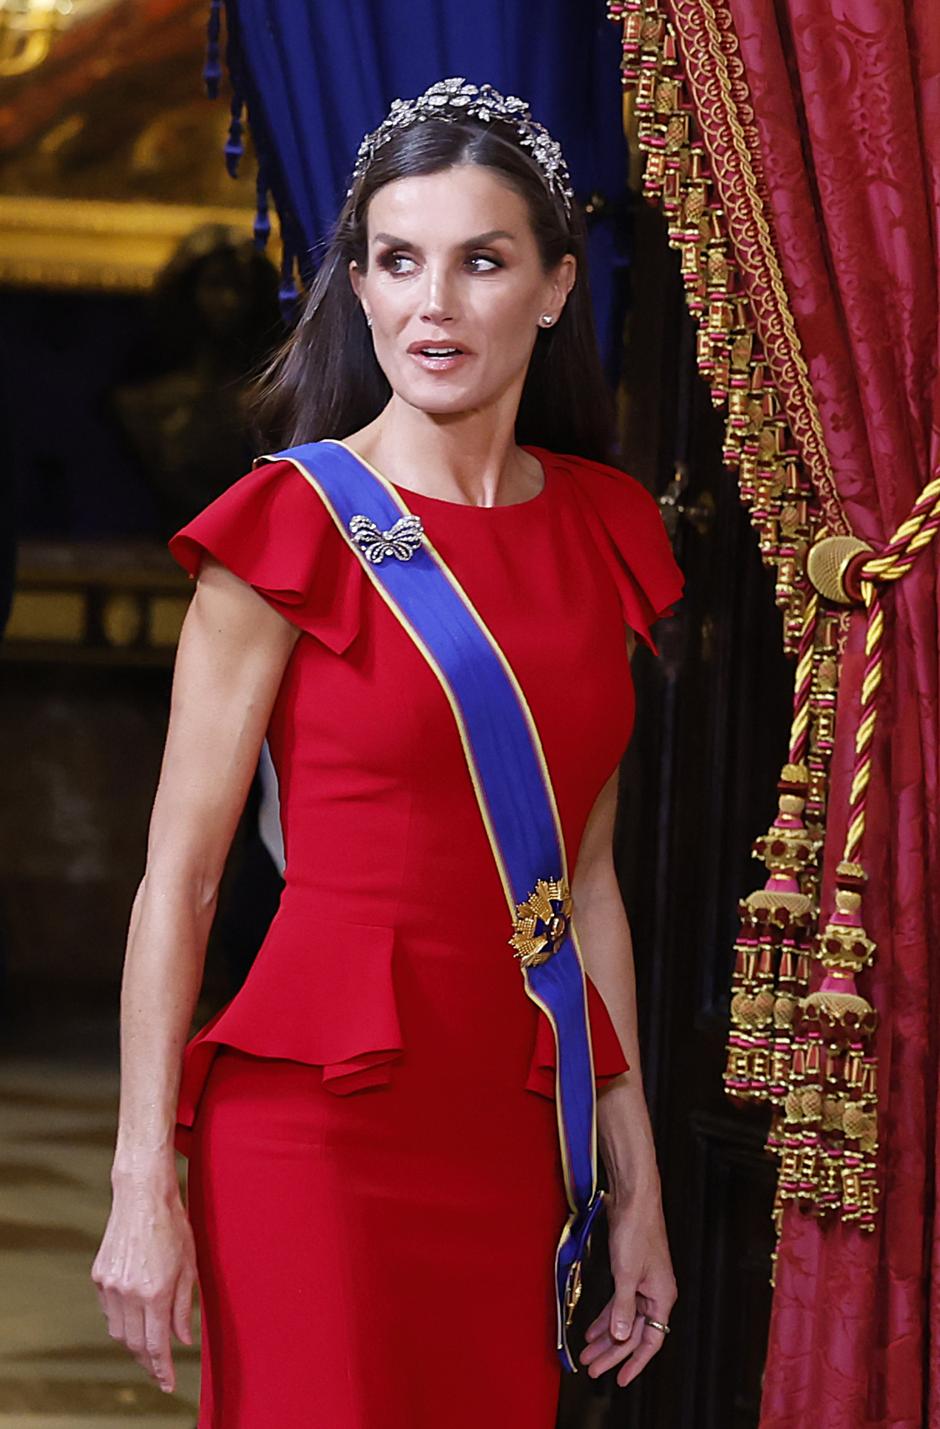 Queen Letiziaduring official dinner ceremony for Colombian President on ocassion his official visit to Spain in Madrid on Wednesday, 3 May 2023.